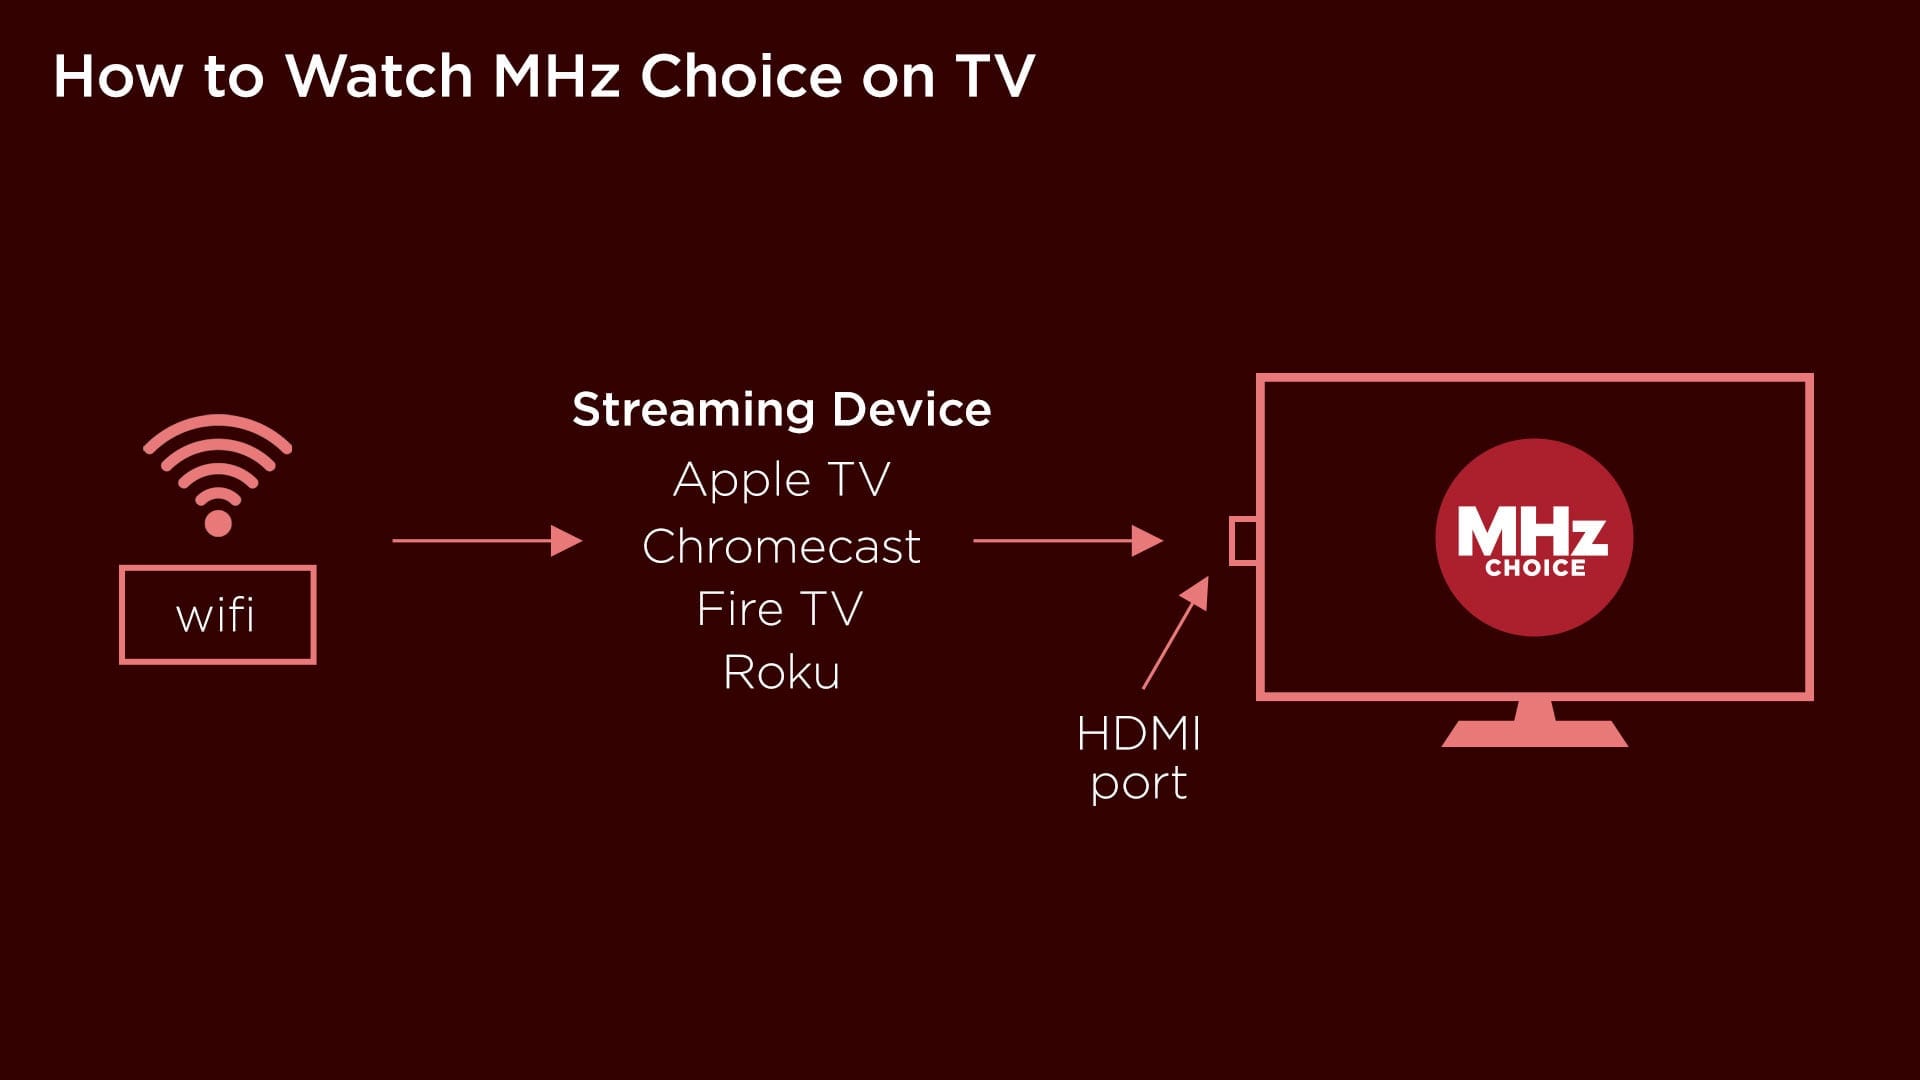 How to Watch MHz Choice on Your TV